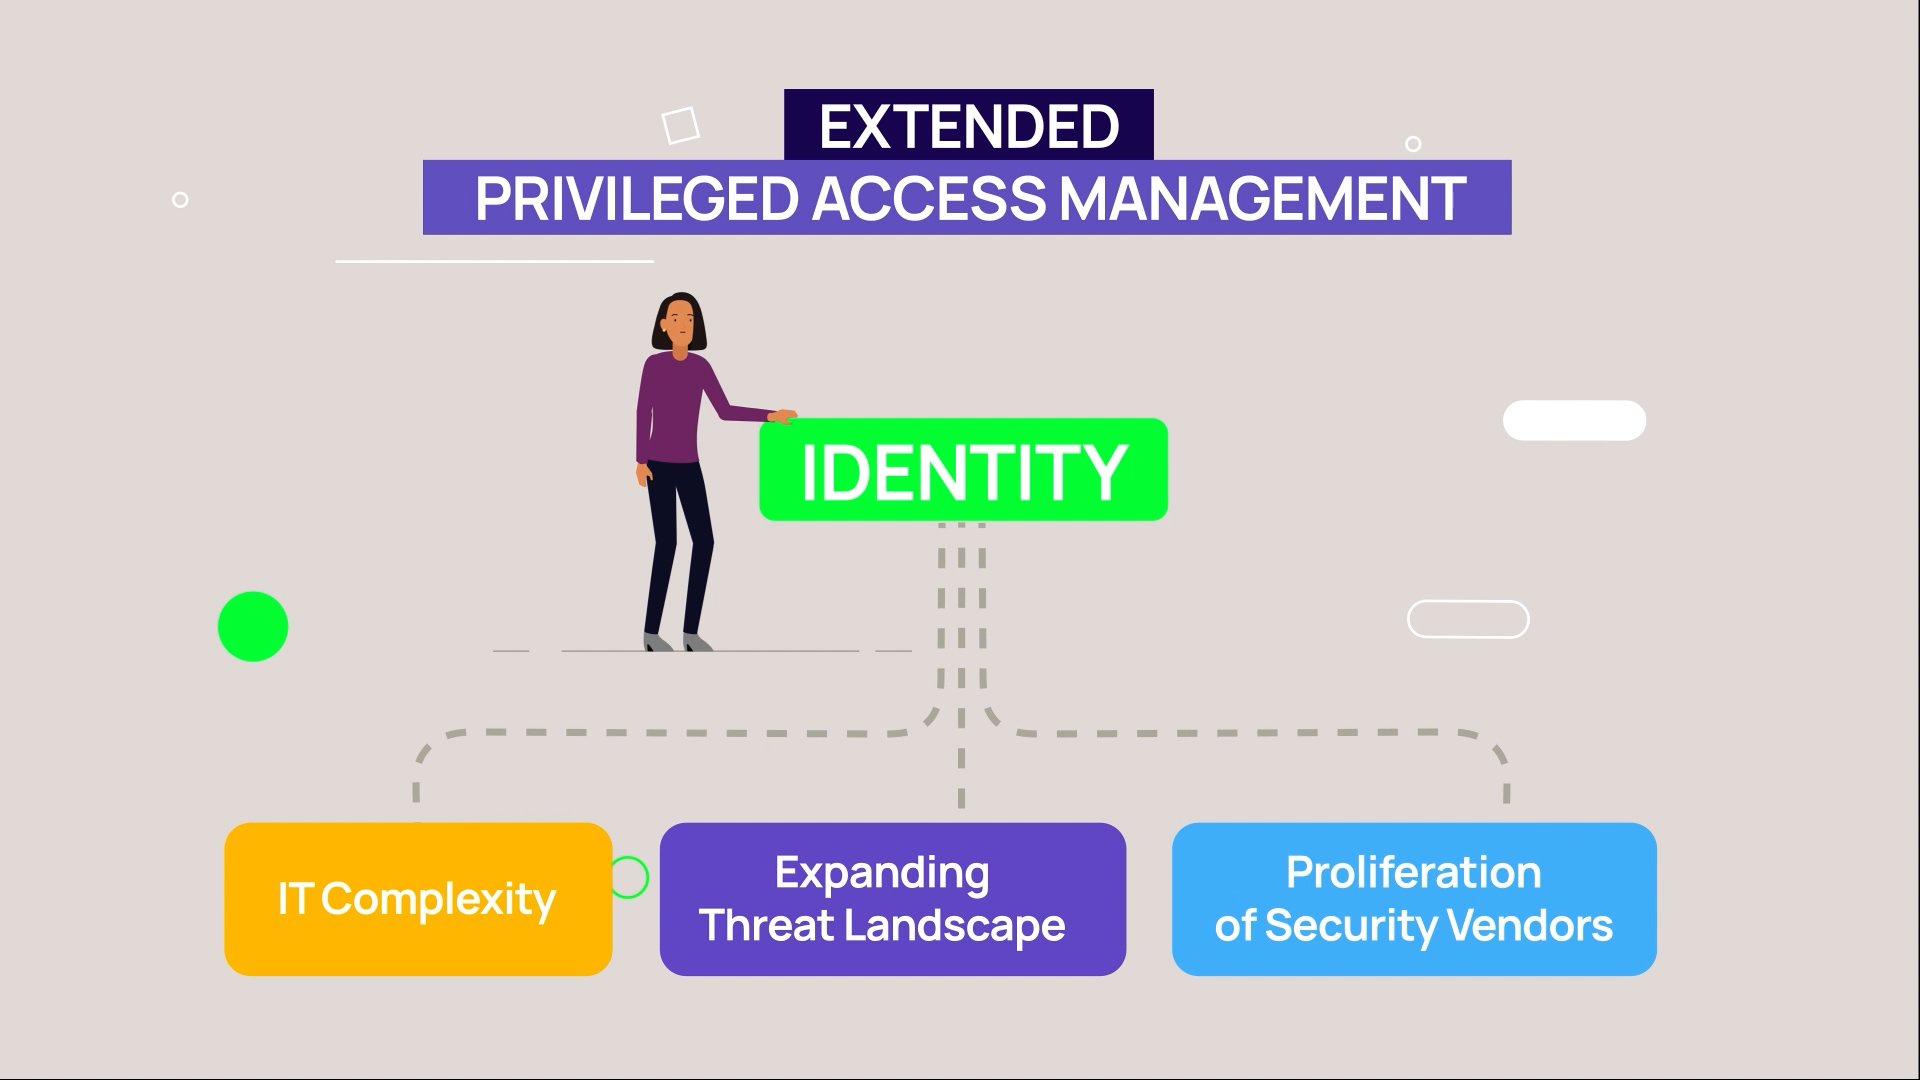 What is Extended Privileged Access Management?